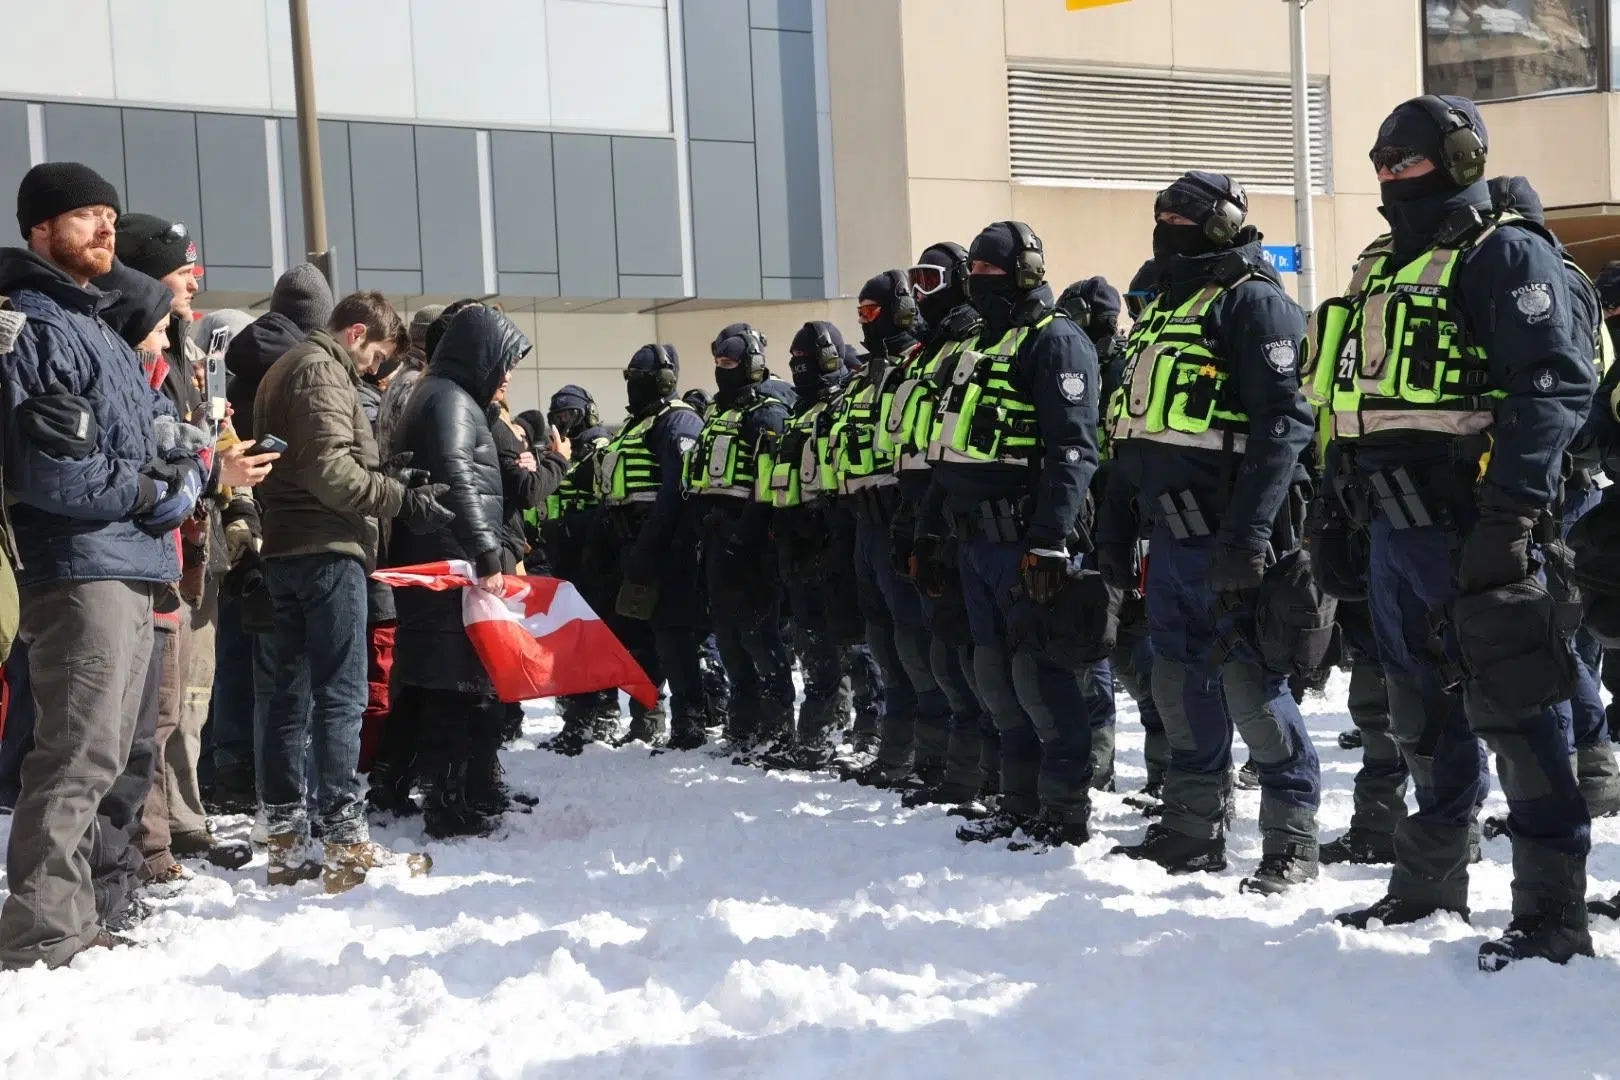 Police Move To End Ottawa Protest